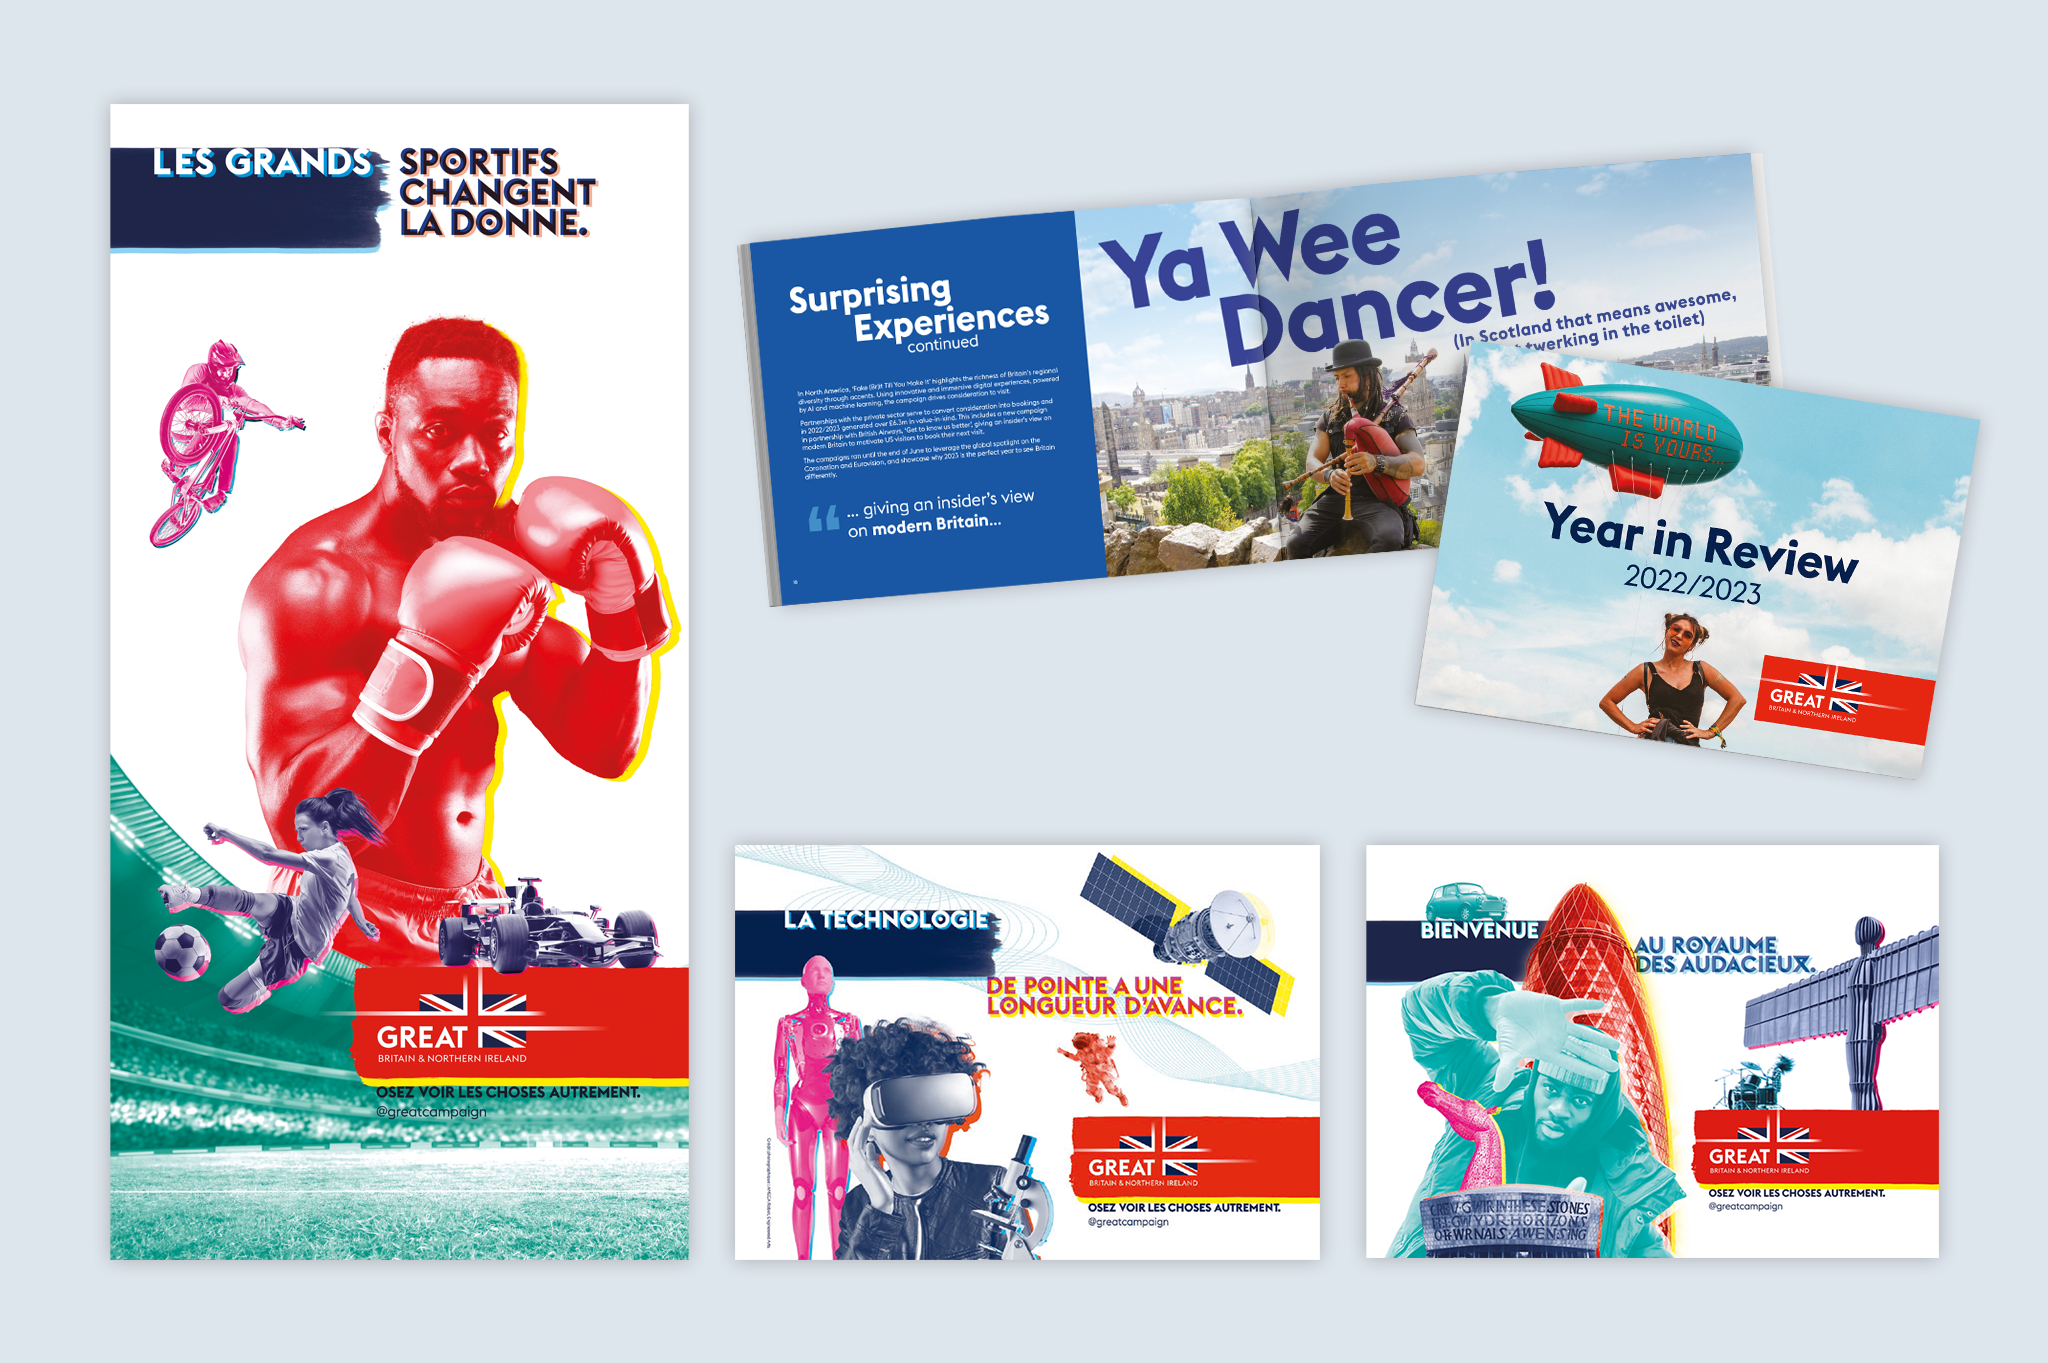 GREAT branded campaign assets including a Year in Review brochure and promotional posters for tourism